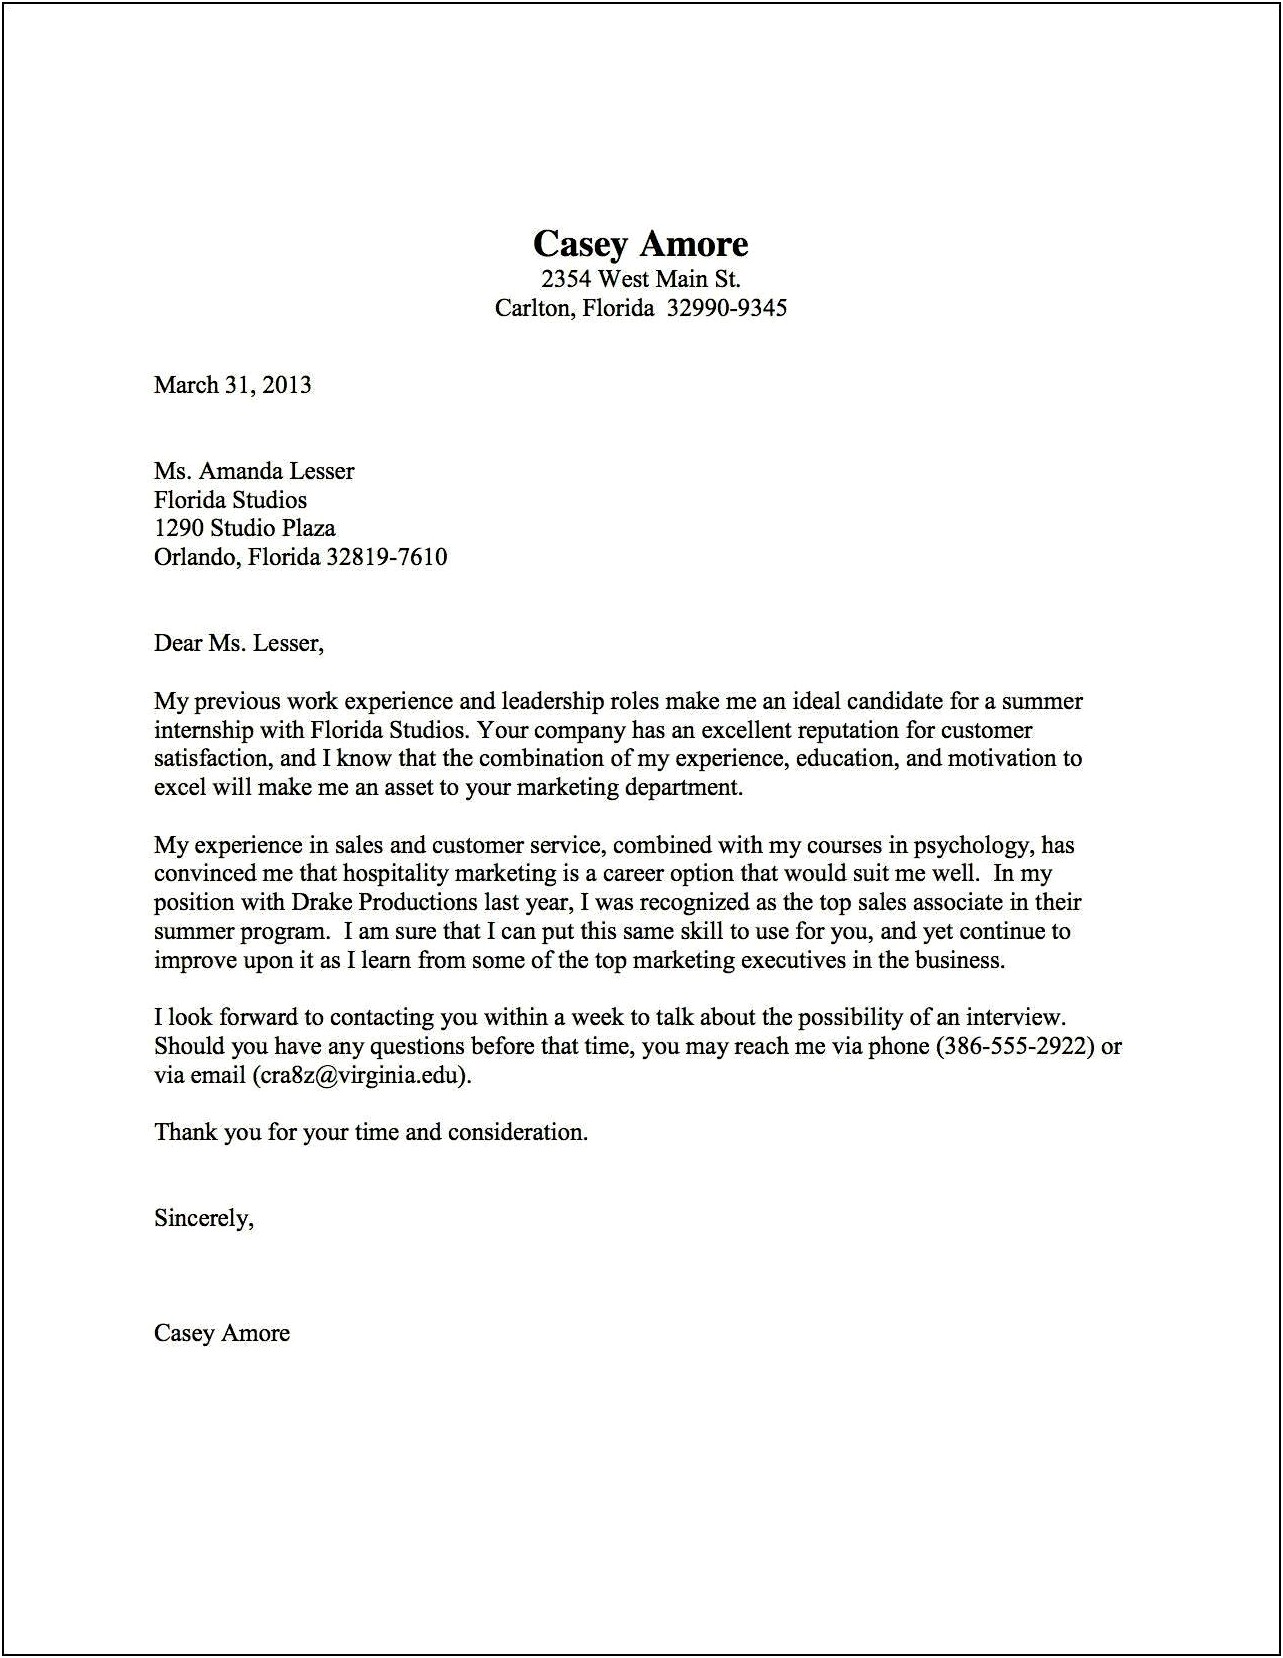 Sample Cover Letters Pdf With Resume